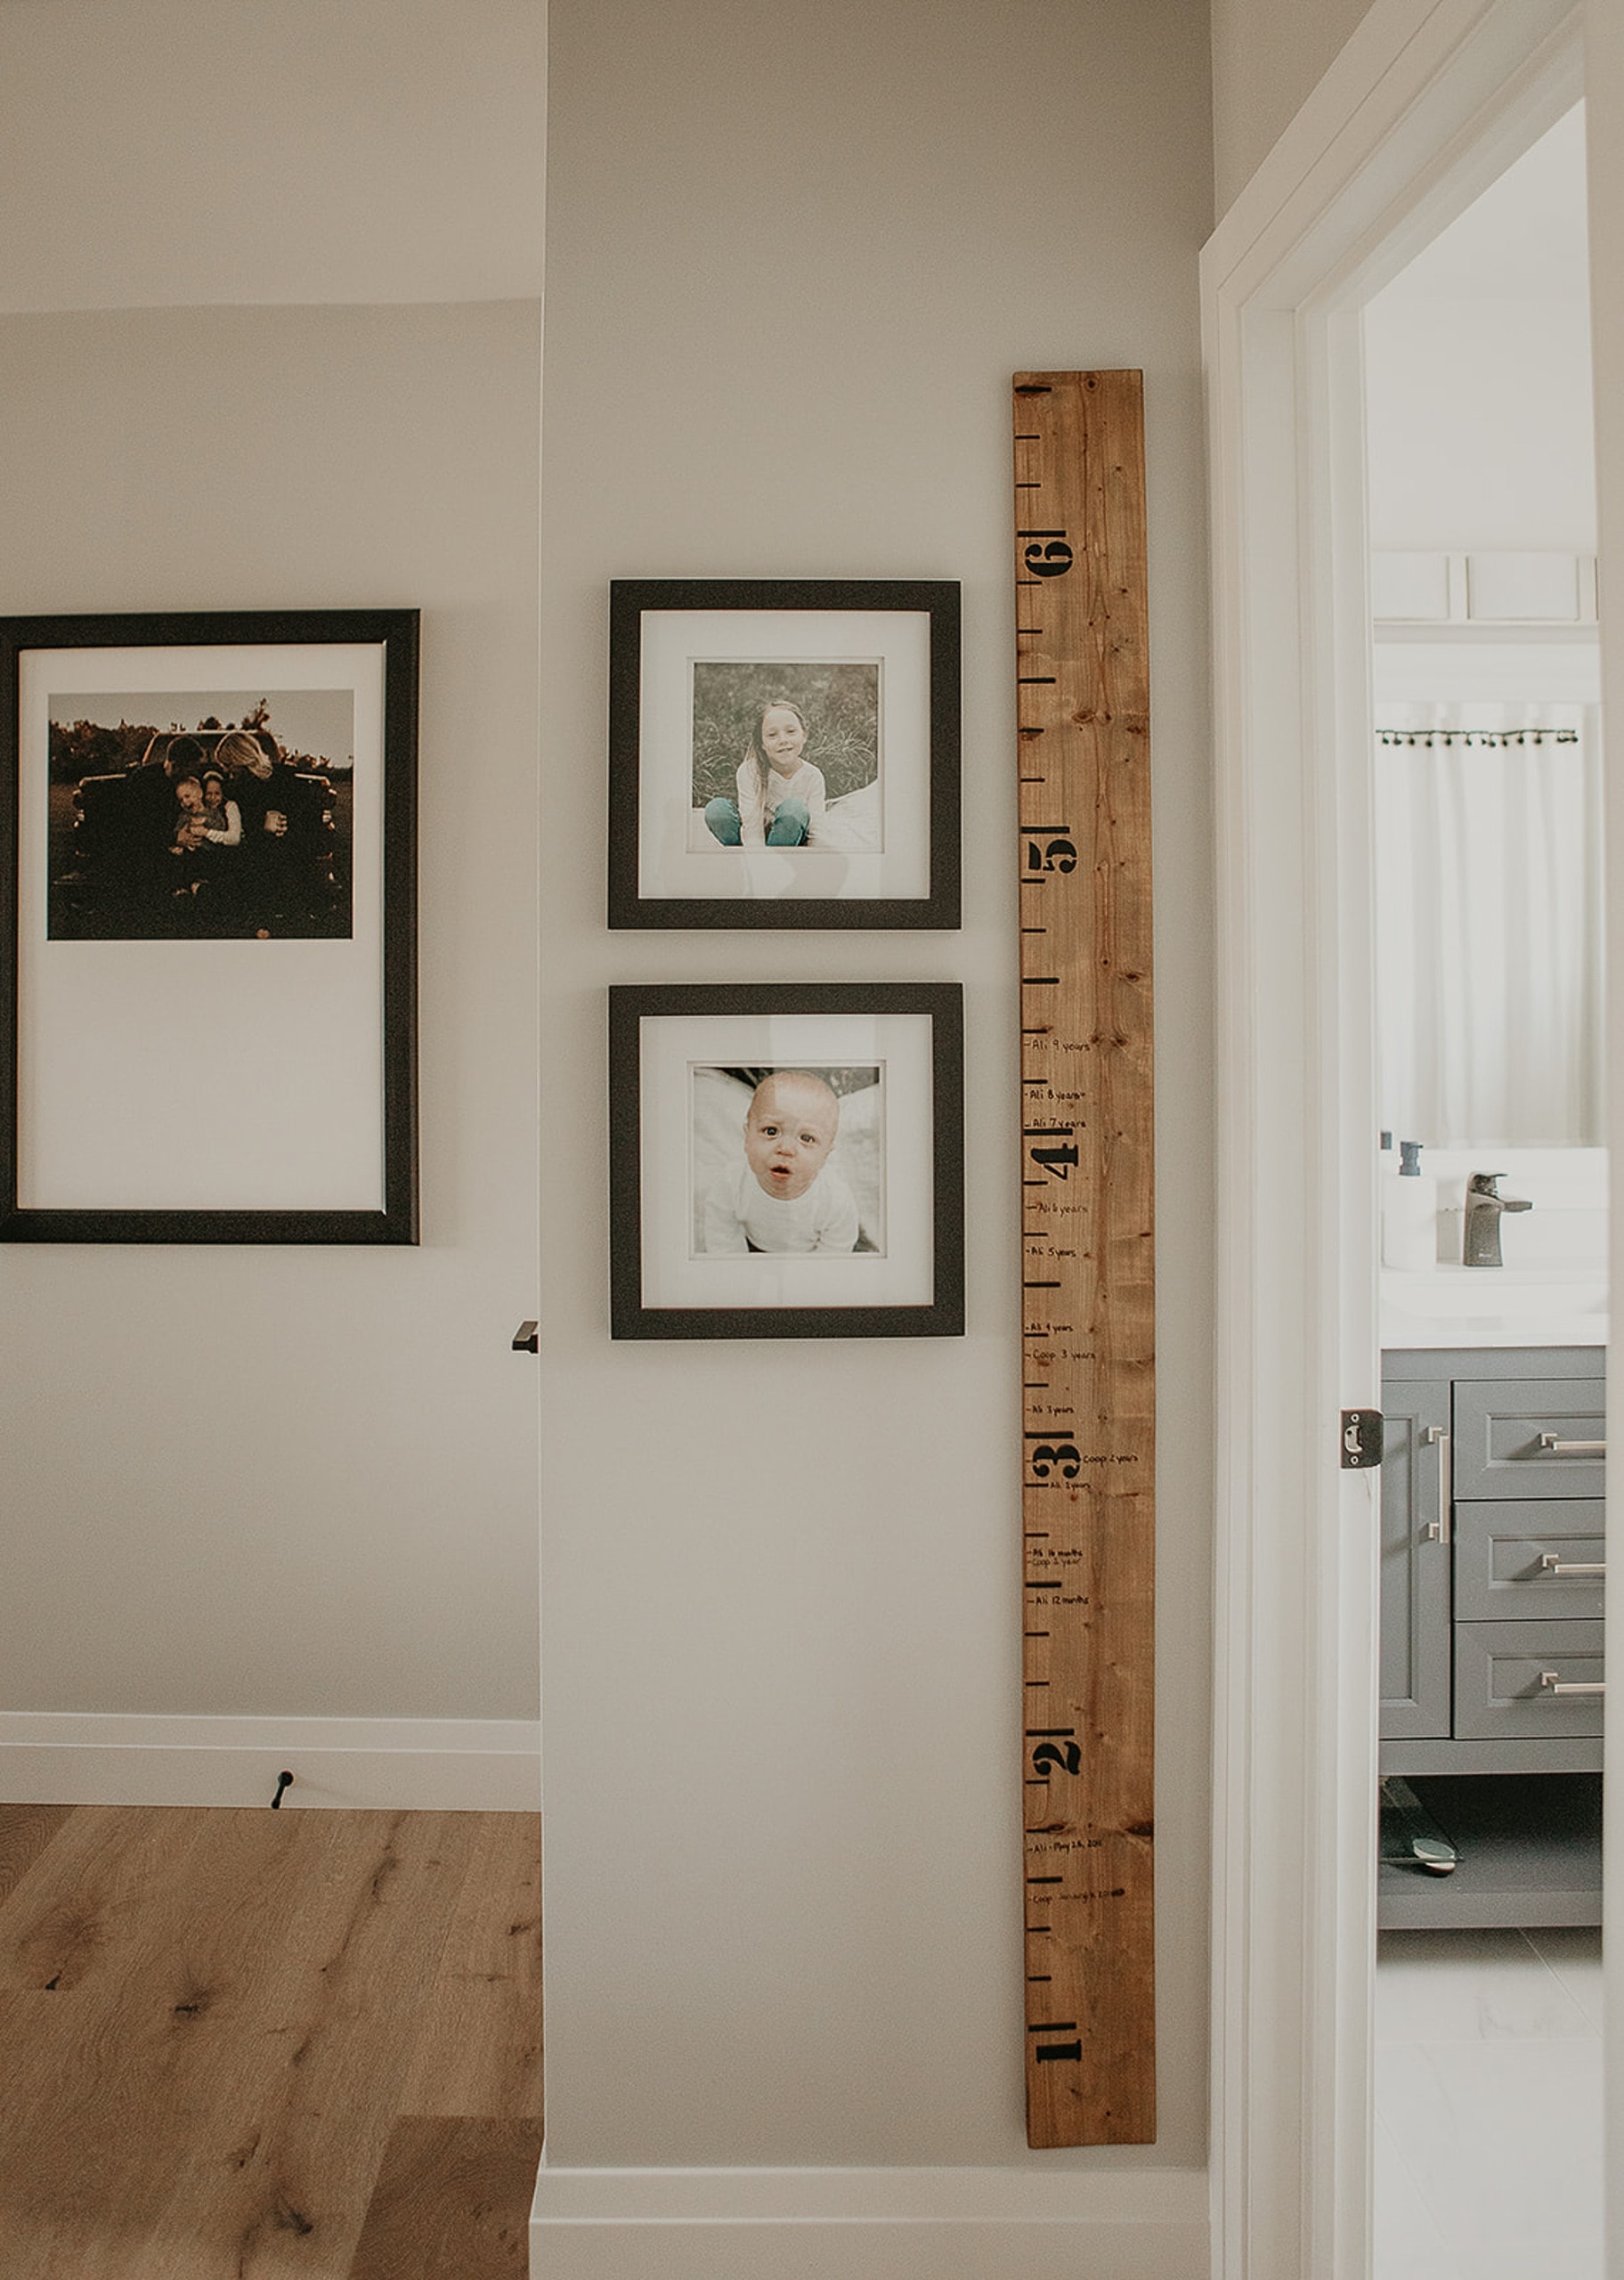 Growth chart in the hallway